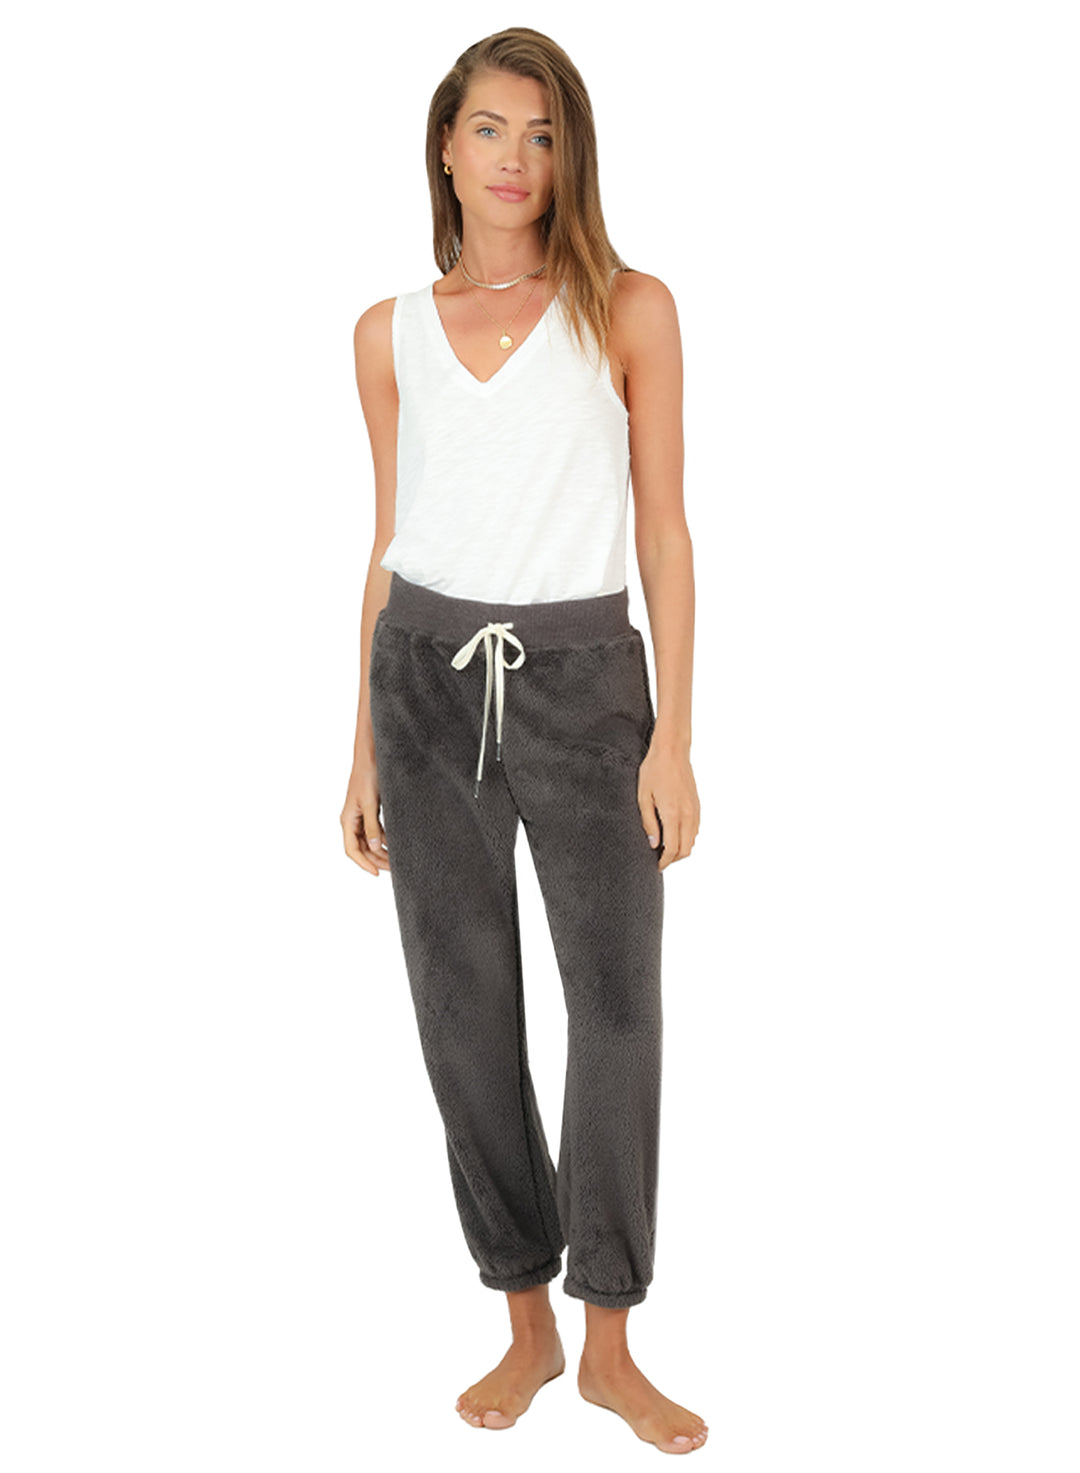 JOGGER - CHARCOAL - Kingfisher Road - Online Boutique